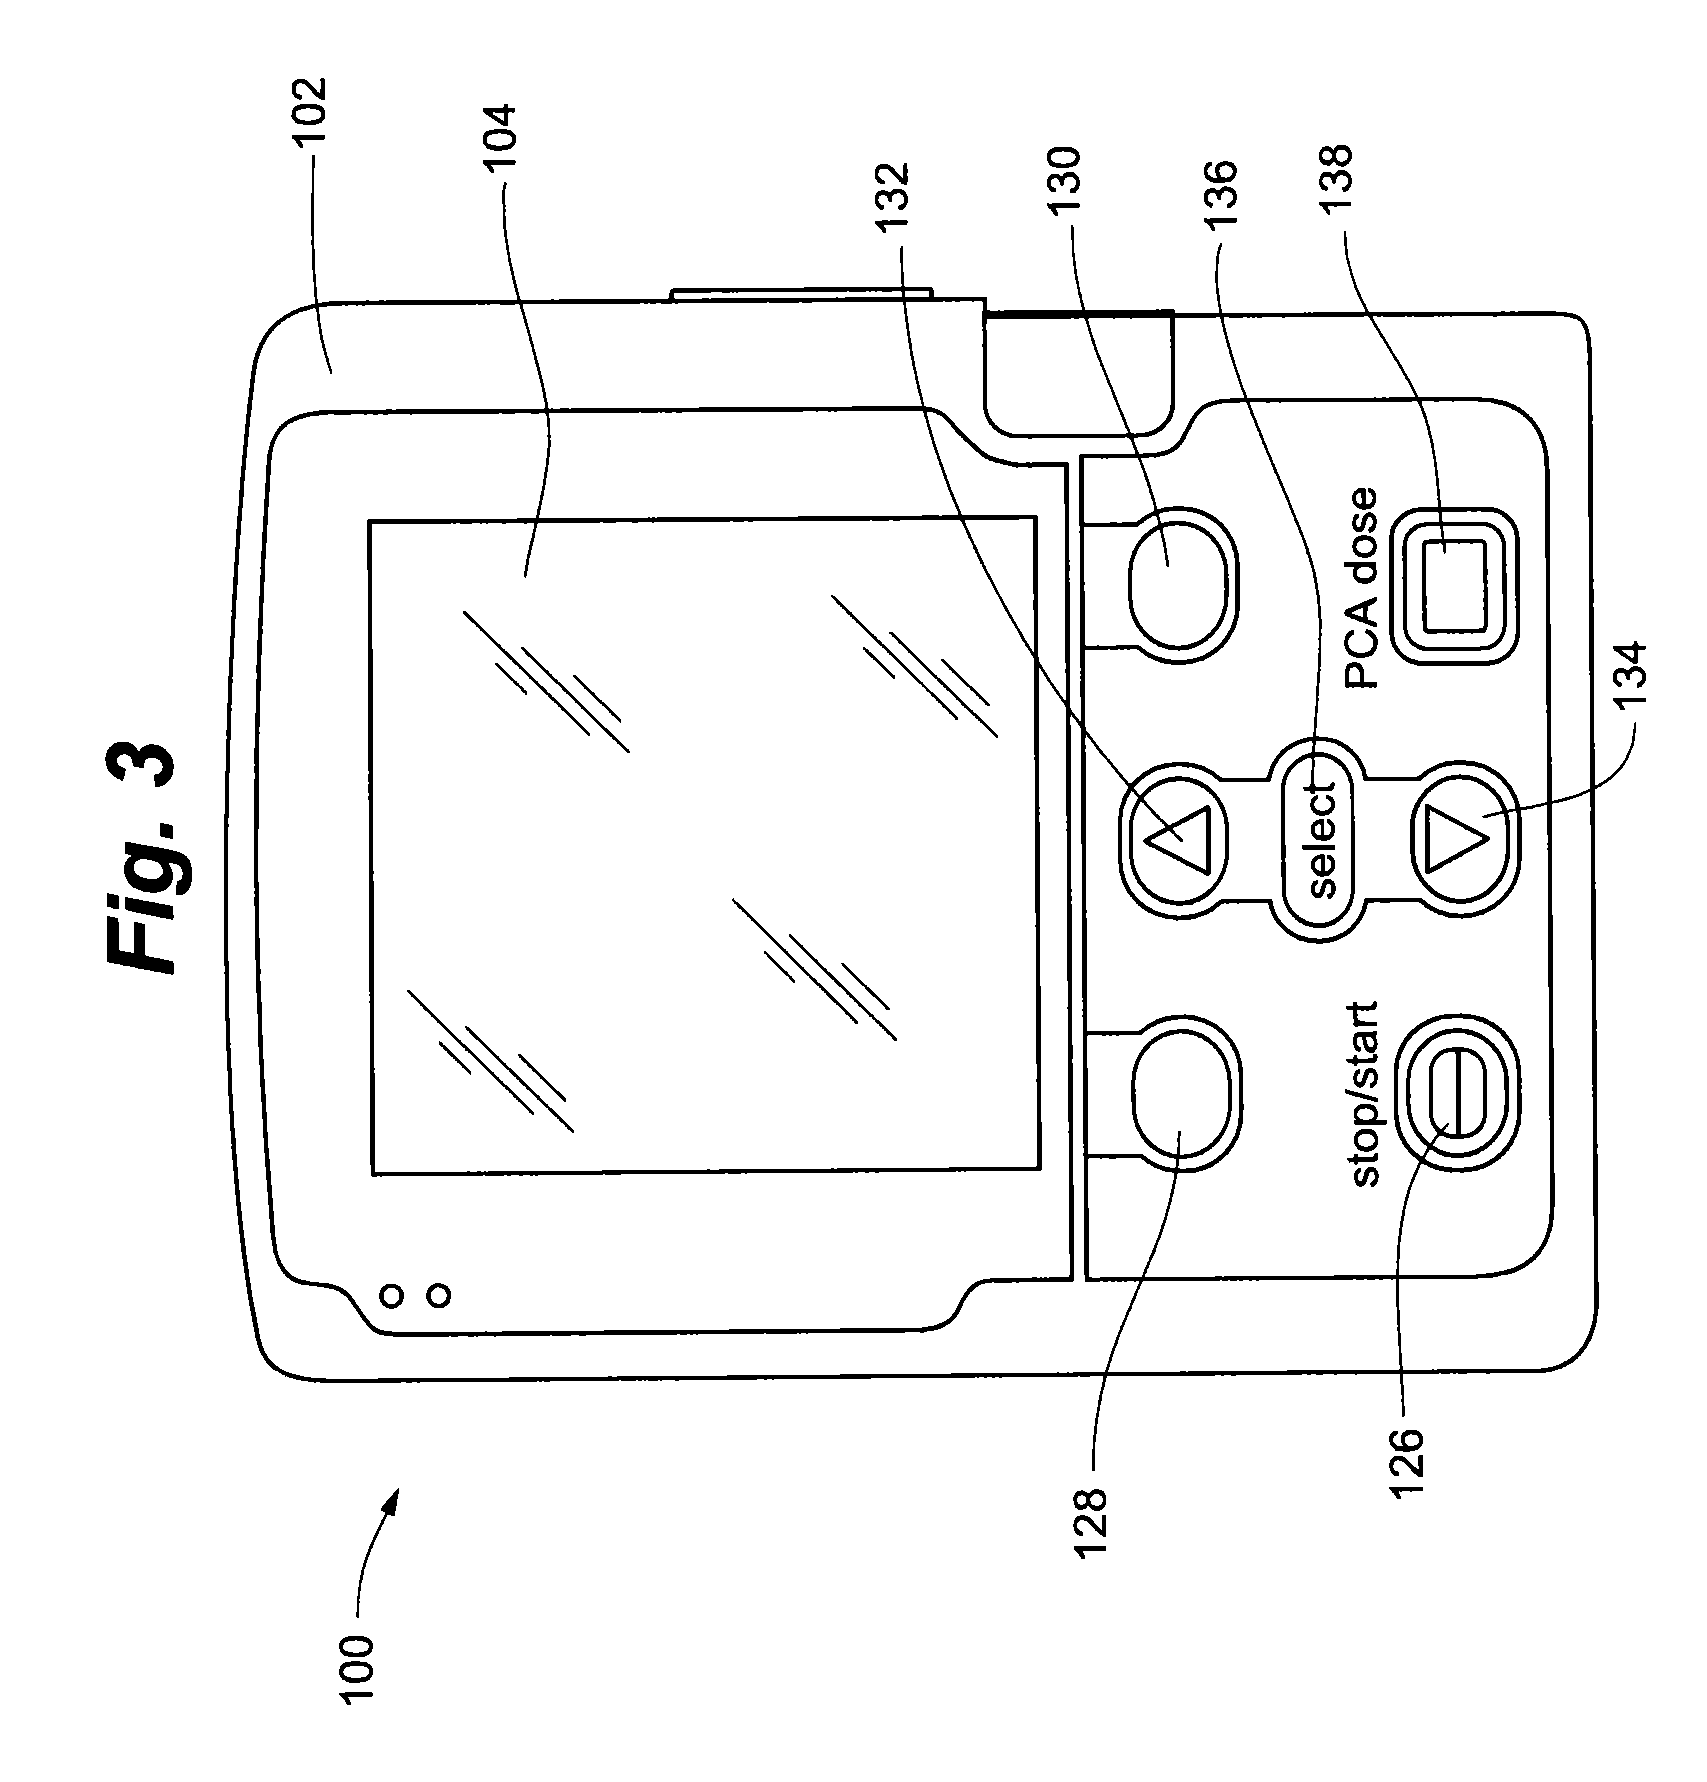 Guided user help system for an ambulatory infusion system